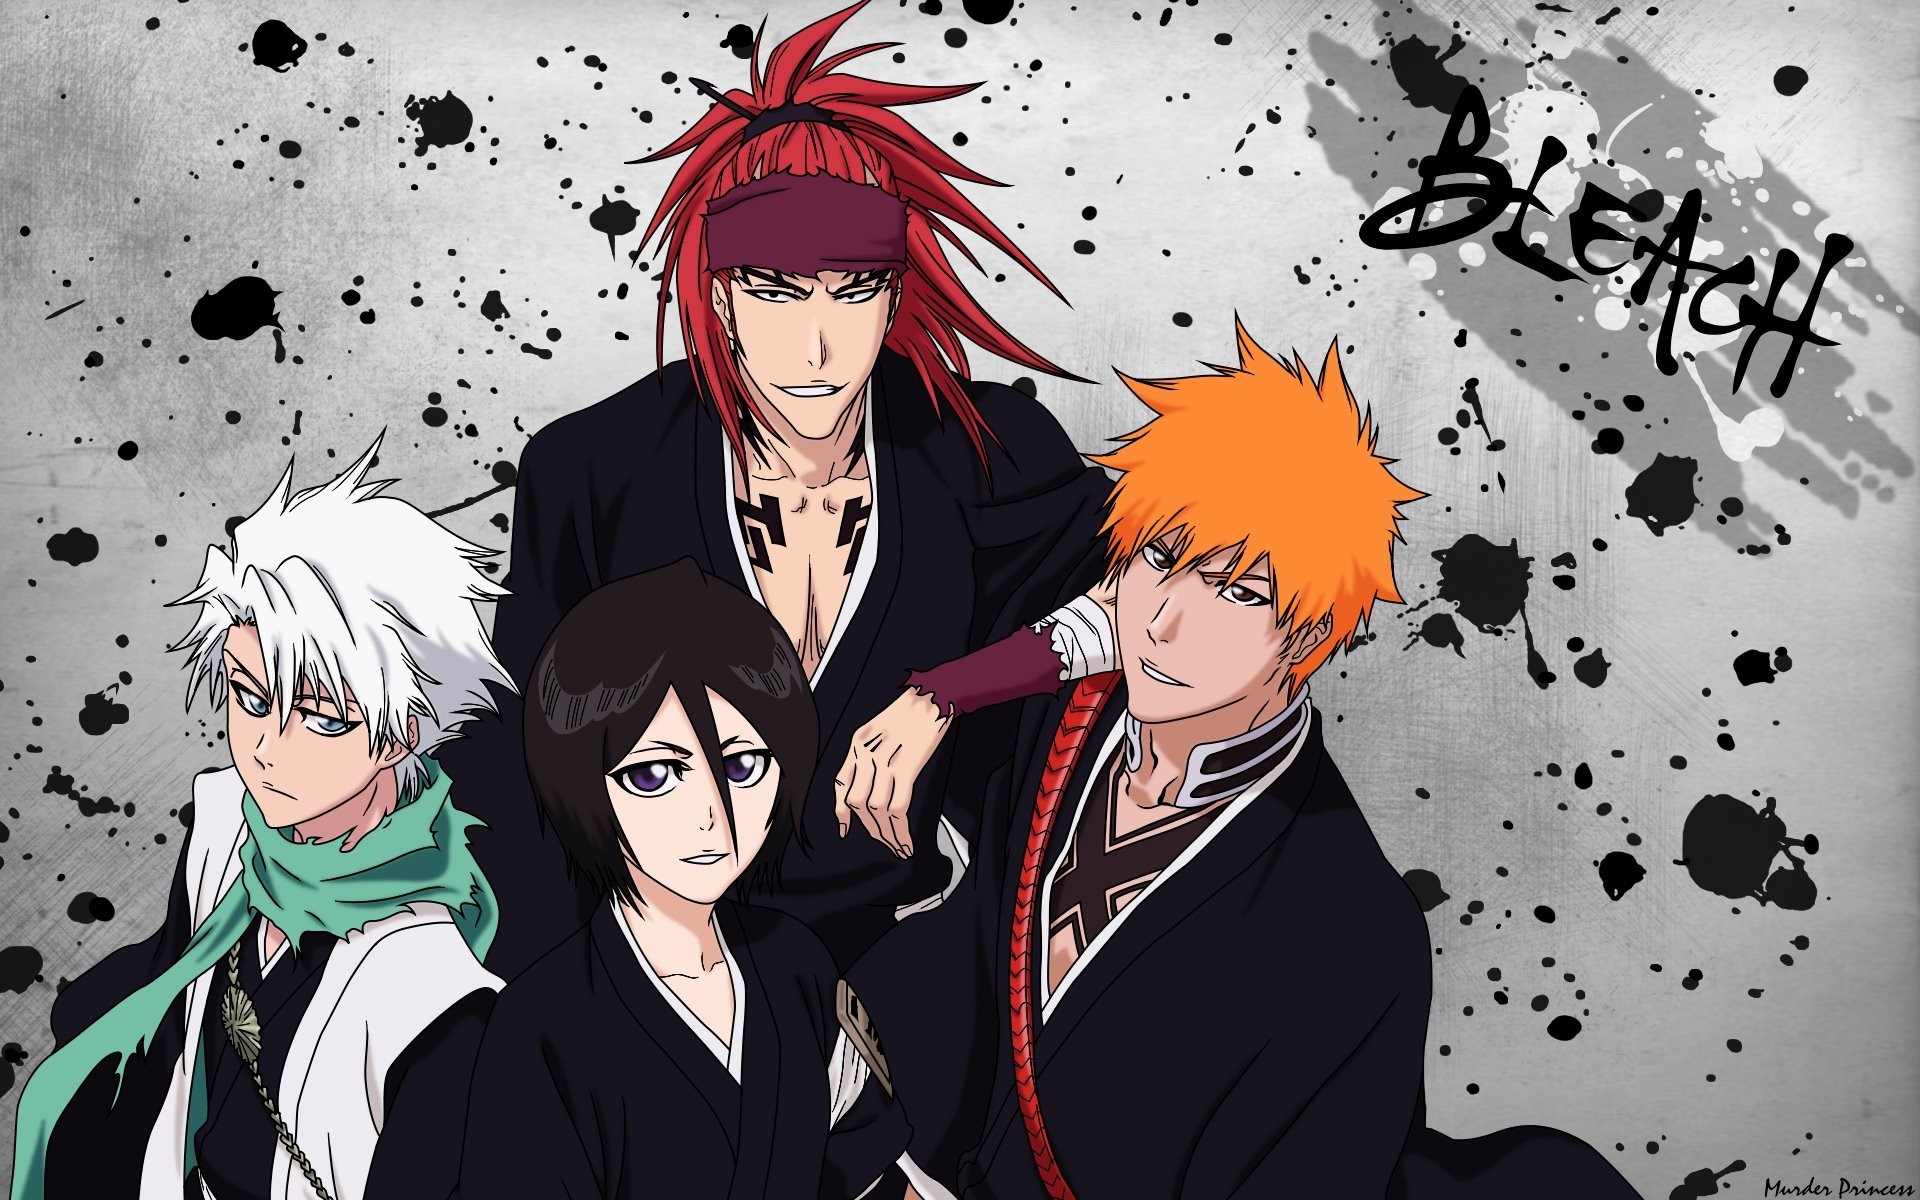 1920x1200 Bleach Anime images Bleach Characters HD wallpaper and background photos